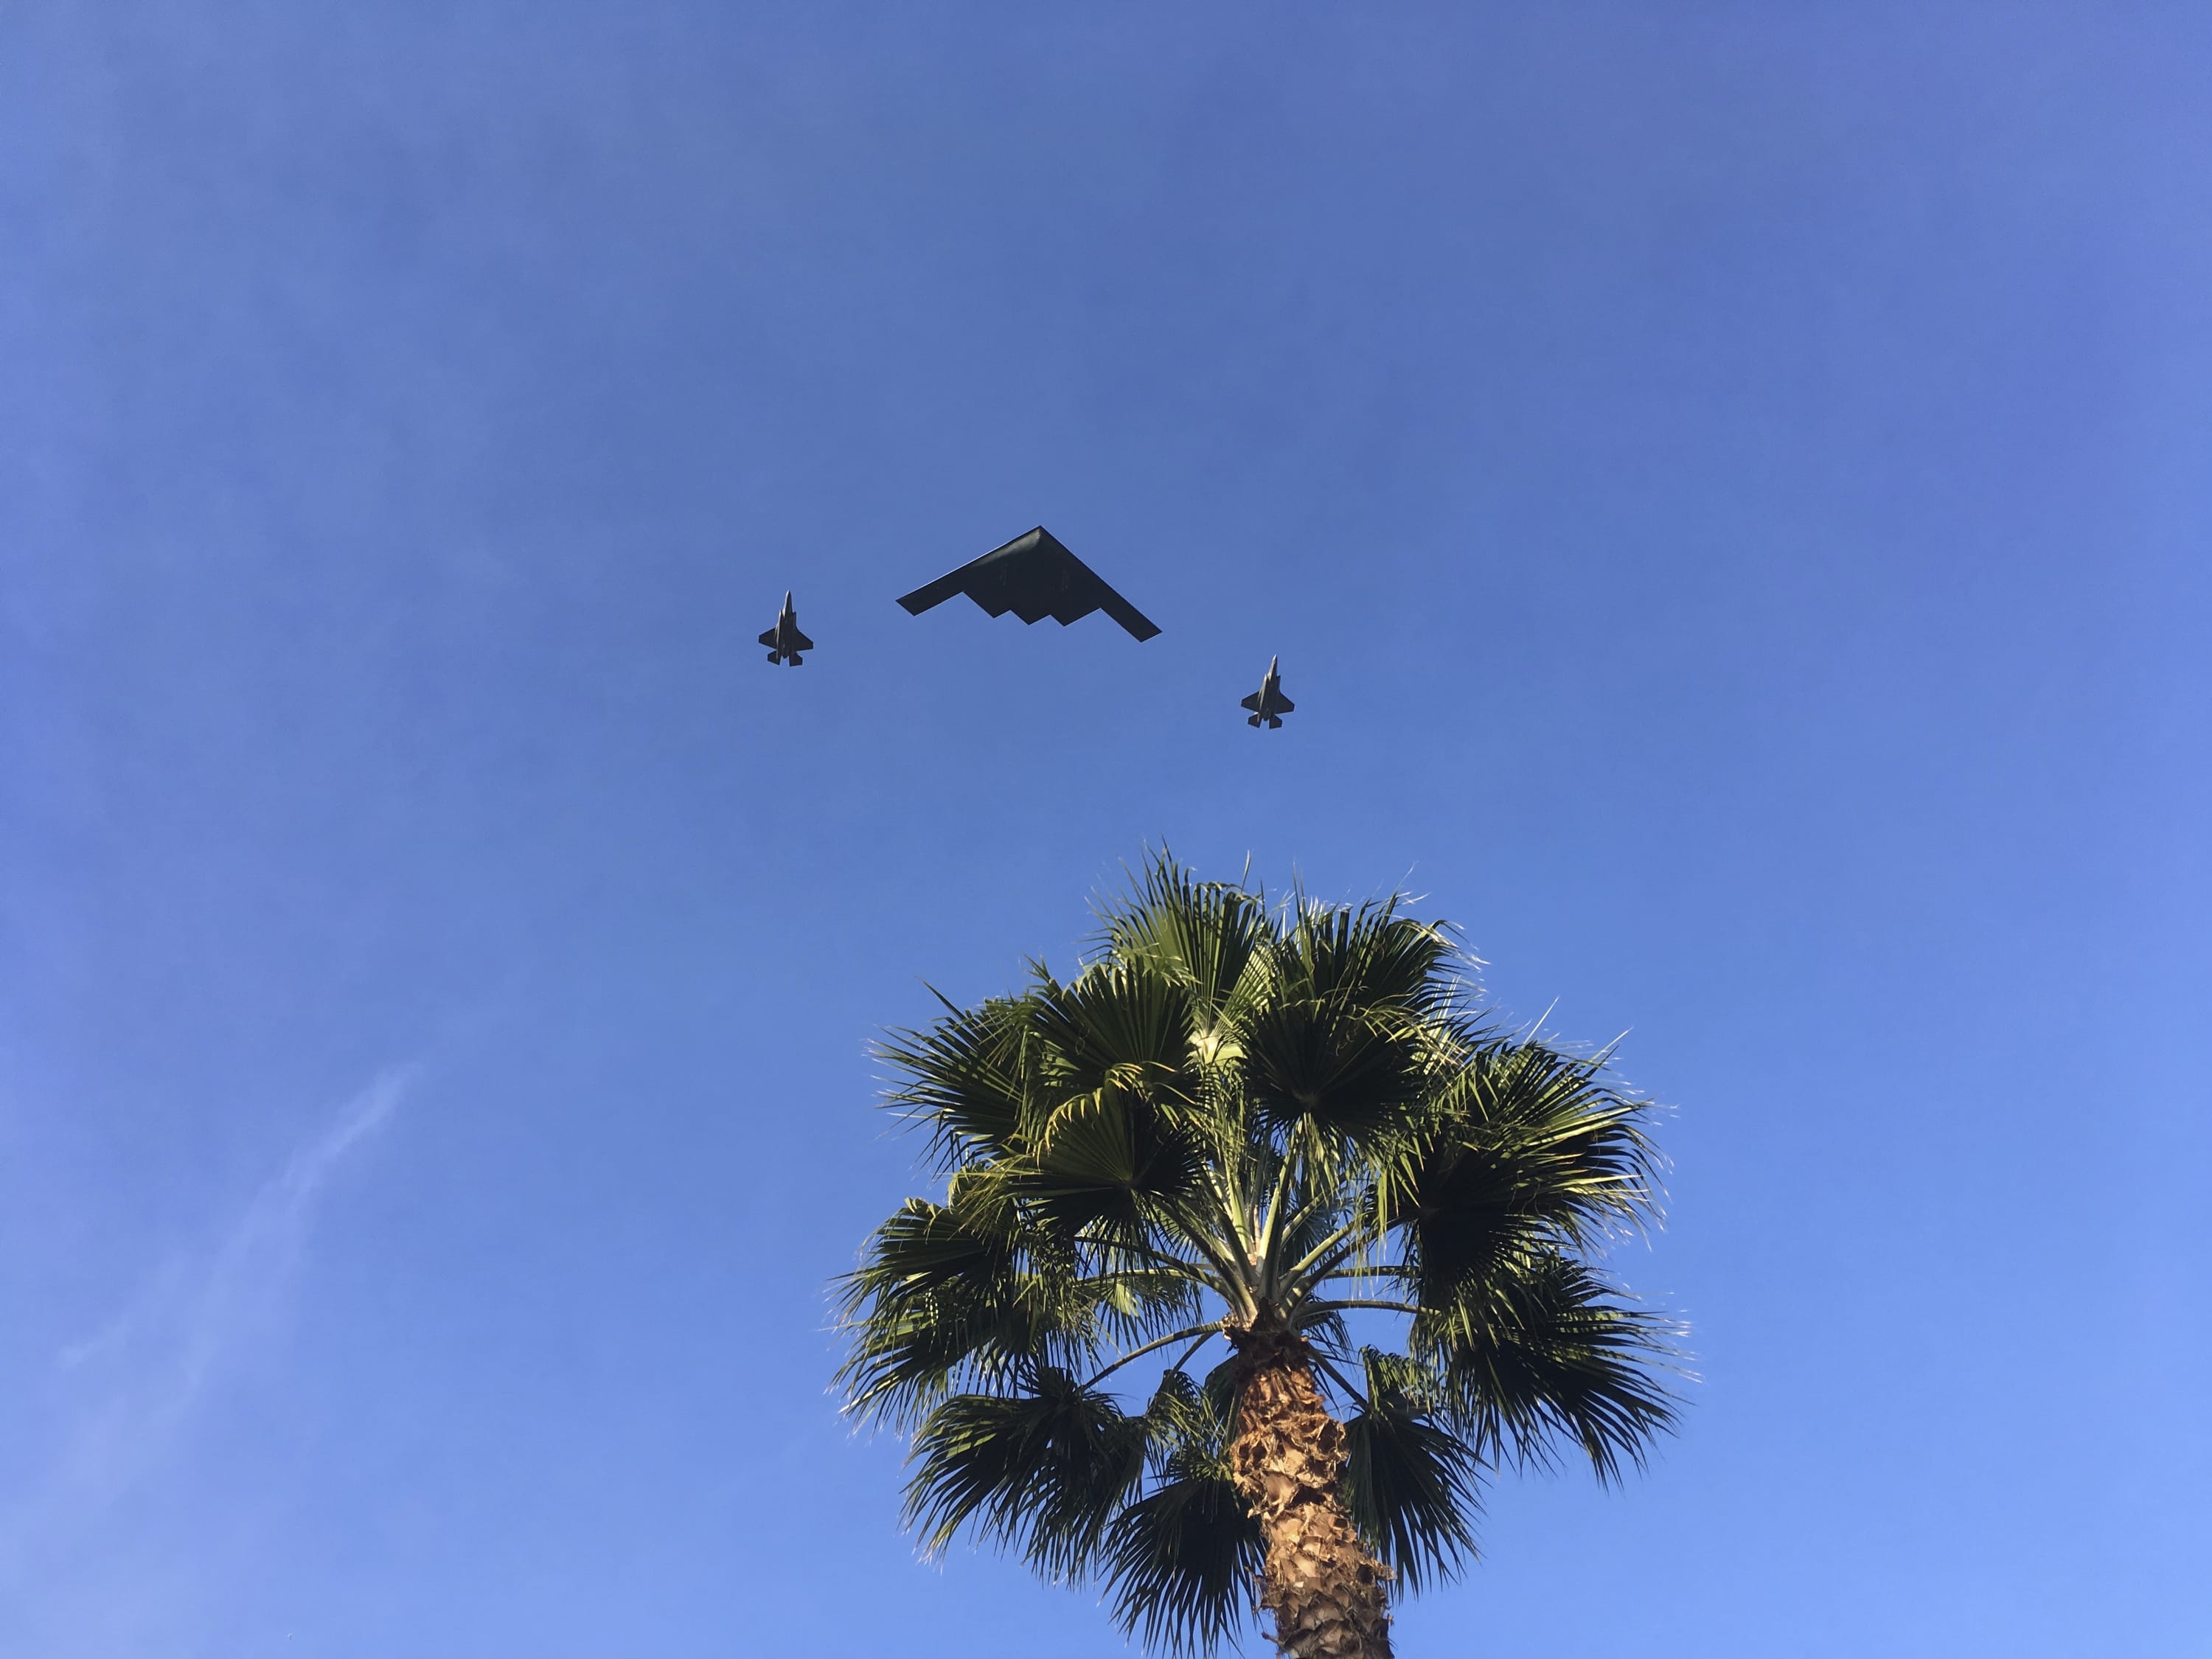 A B-2 Spirit, also known as the Stealth Bomber, and two fighters jets fly over the 2018 Rose Parade route in Pasadena, Calif., Monday, Jan. 1, 2018. The 129th annual parade got started Monday in Pasadena with an announcement by the grand marshal, actor Gary Sinise, and a military flyover. The theme of the 2018 parade is "Making a Difference" and Sinise was chosen to lead the proceedings because of his devotion to veteran's issues.